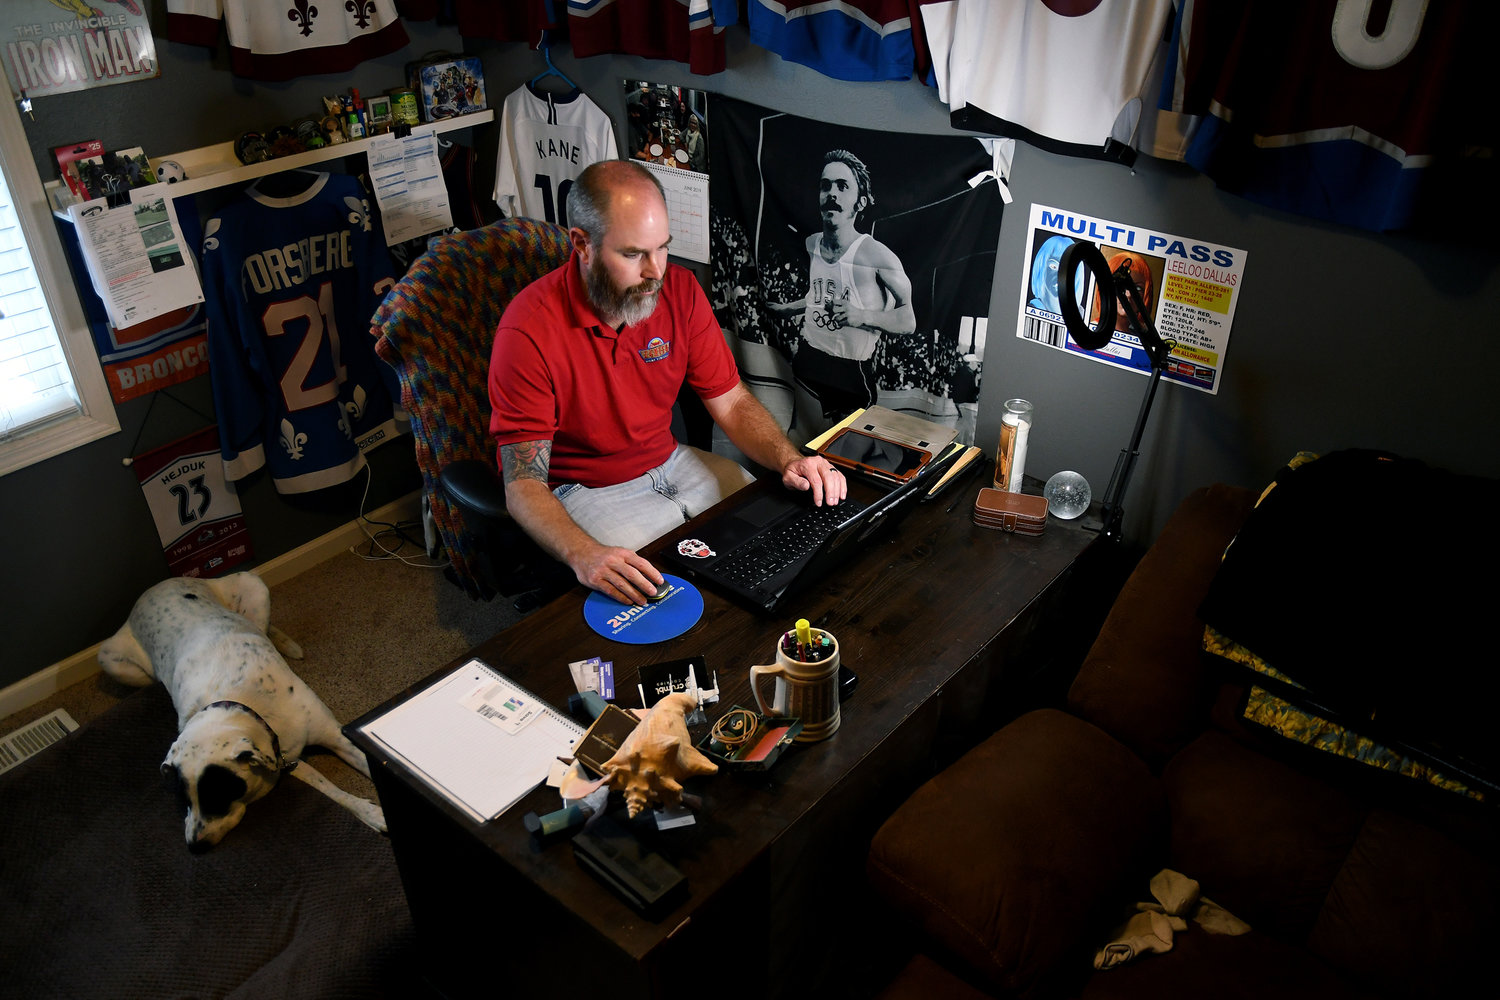 Kyle Tomcak works in his home office in Aurora, Colo., on Monday, July 18, 2022. Tomcak was in the market for a home priced around $450,000 for his in-laws and he and his wife bid on every house they toured, regardless of whether they fell in love with the home. He said his search became increasingly dispiriting as he not only lost out to investors fronting cash offers $100,000 over asking price but as mortgage rates started to balloon. He has since pulled out of the housing search. (AP Photo/Thomas Peipert)